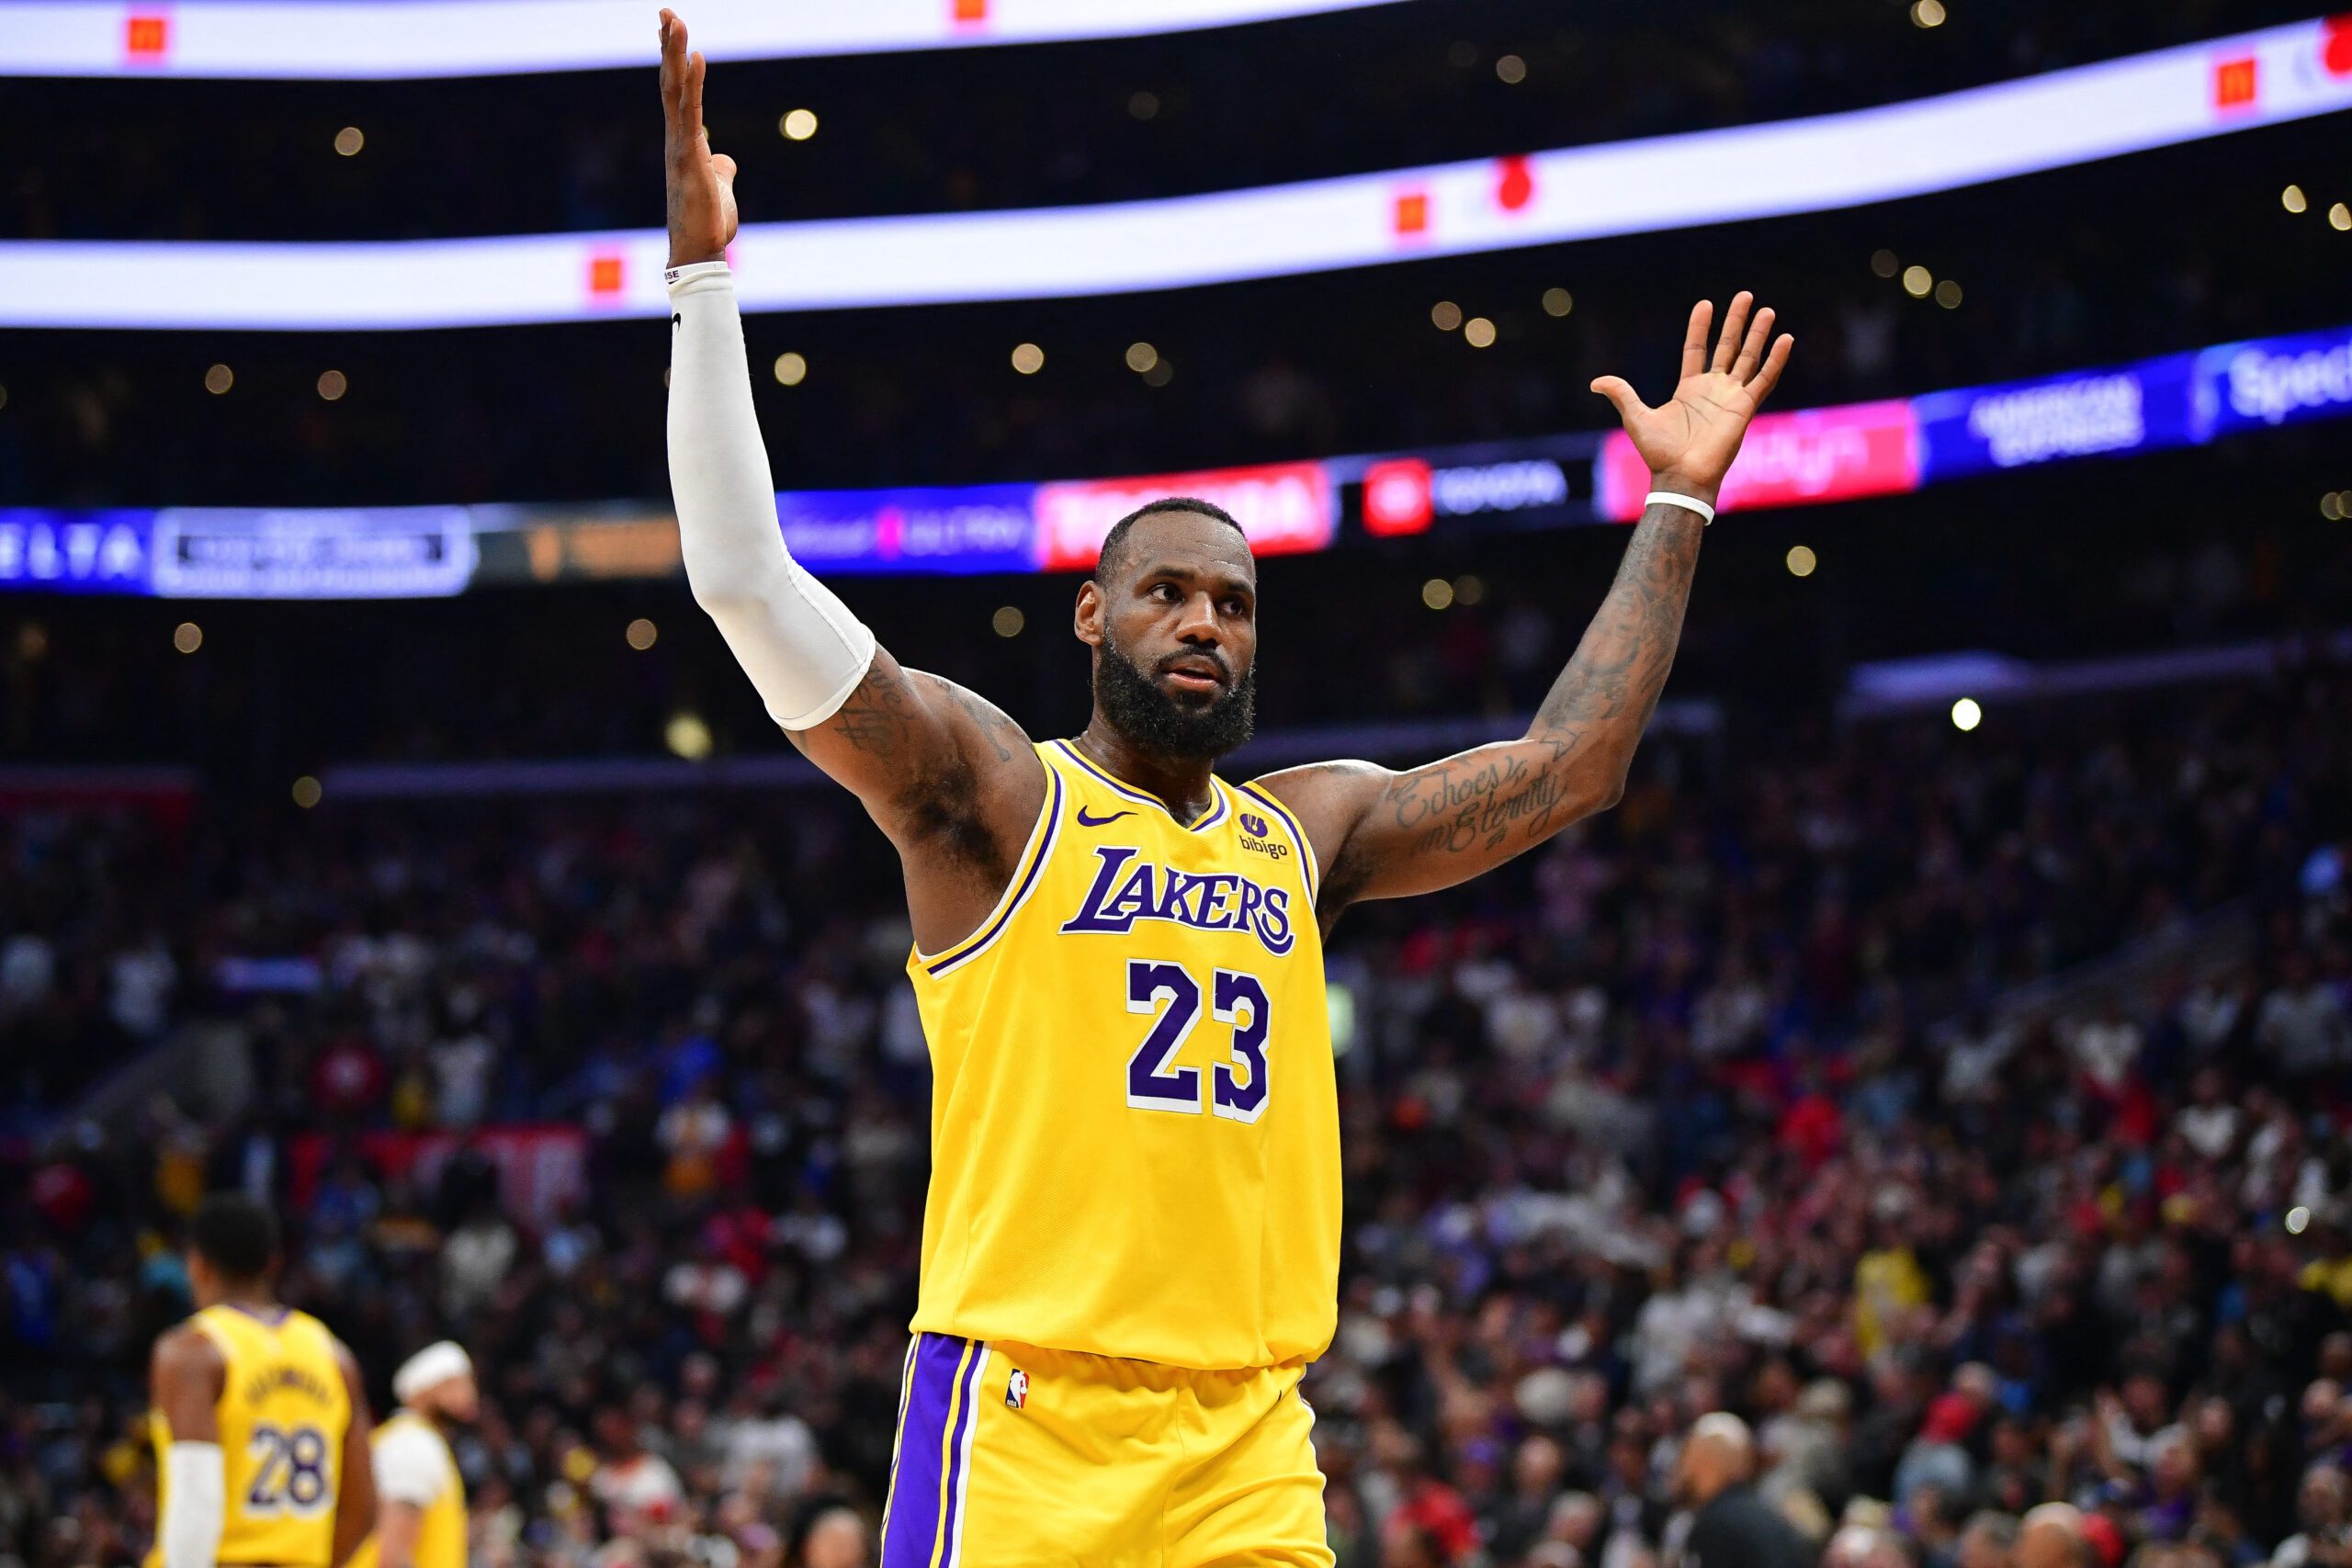 LeBron final-quarter show fuels Lakers comeback over Clippers